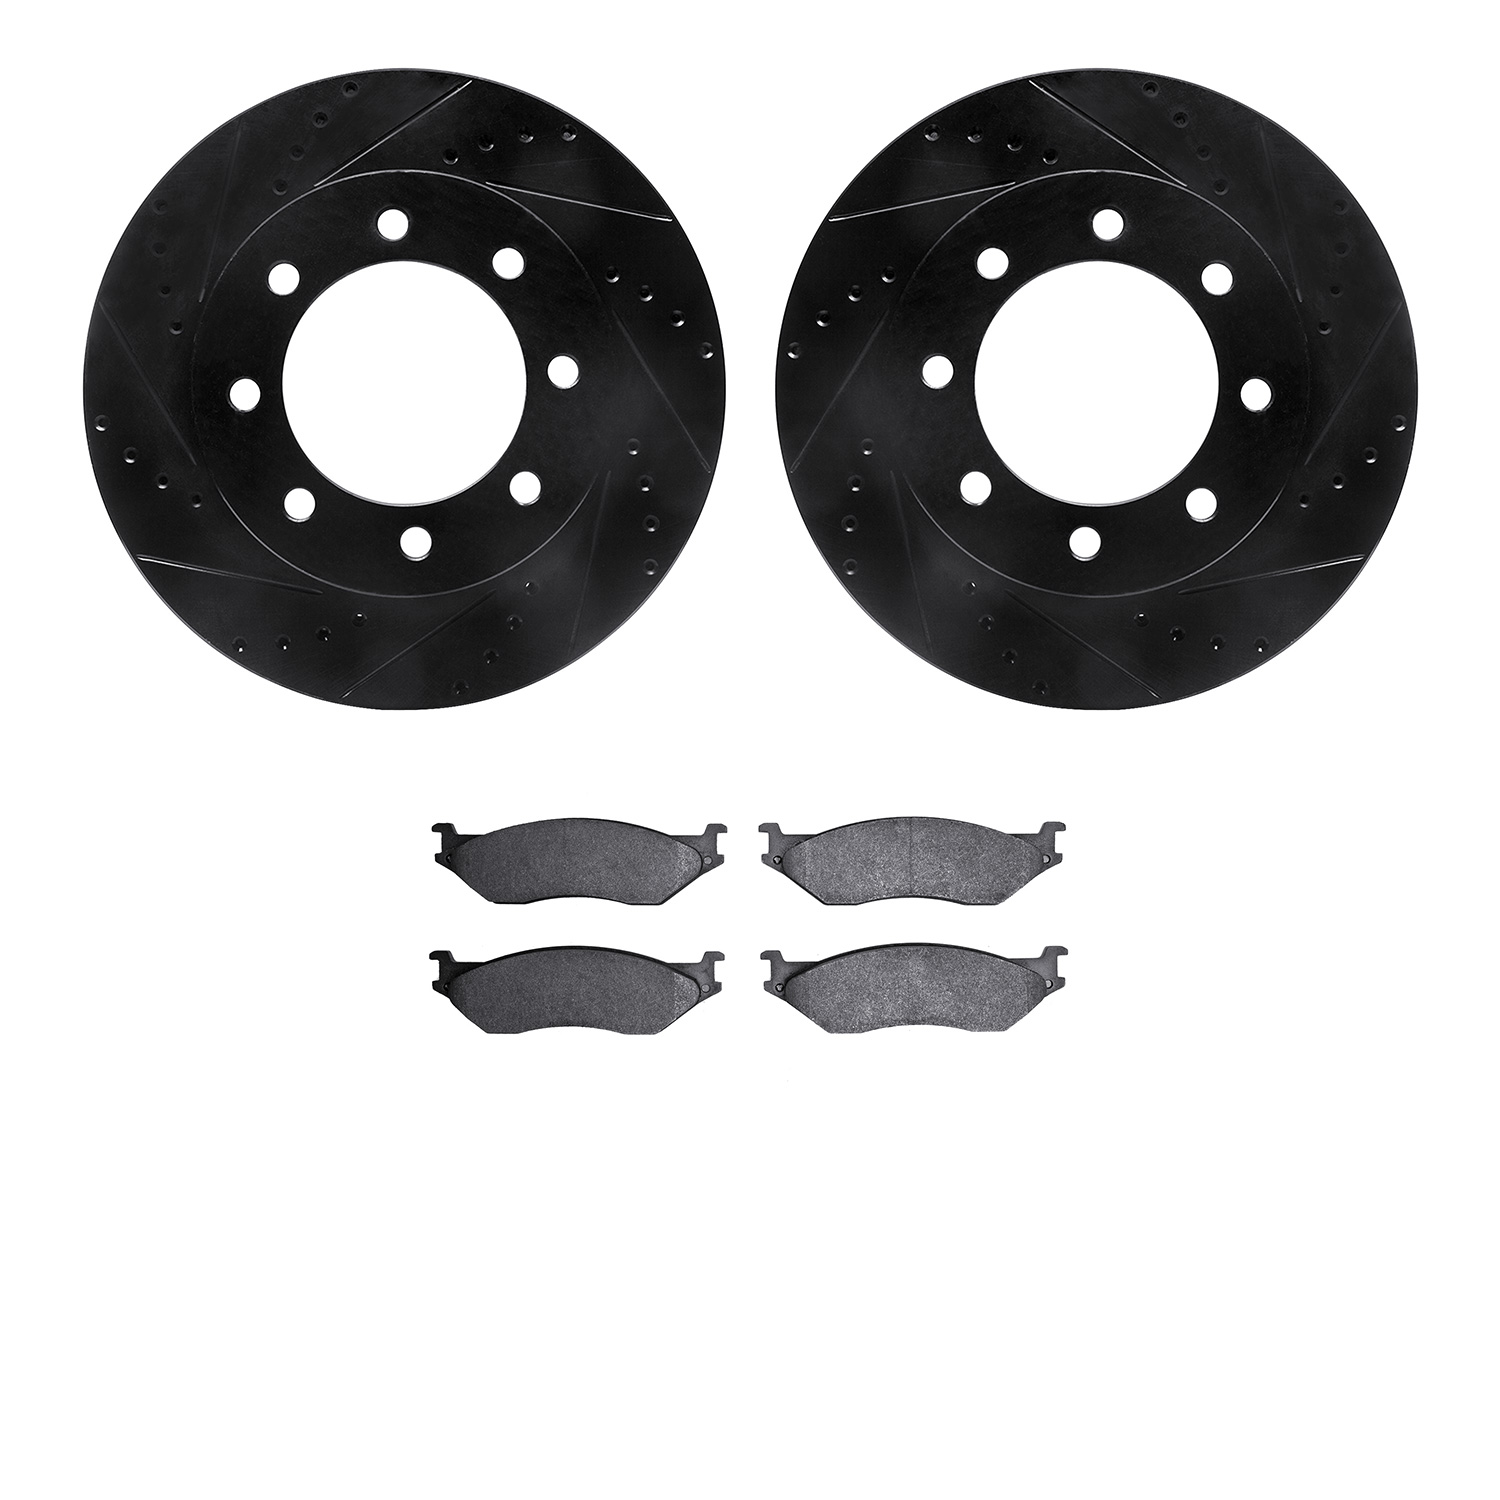 8402-54044 Drilled/Slotted Brake Rotors with Ultimate-Duty Brake Pads Kit [Black], 1999-2001 Ford/Lincoln/Mercury/Mazda, Positio